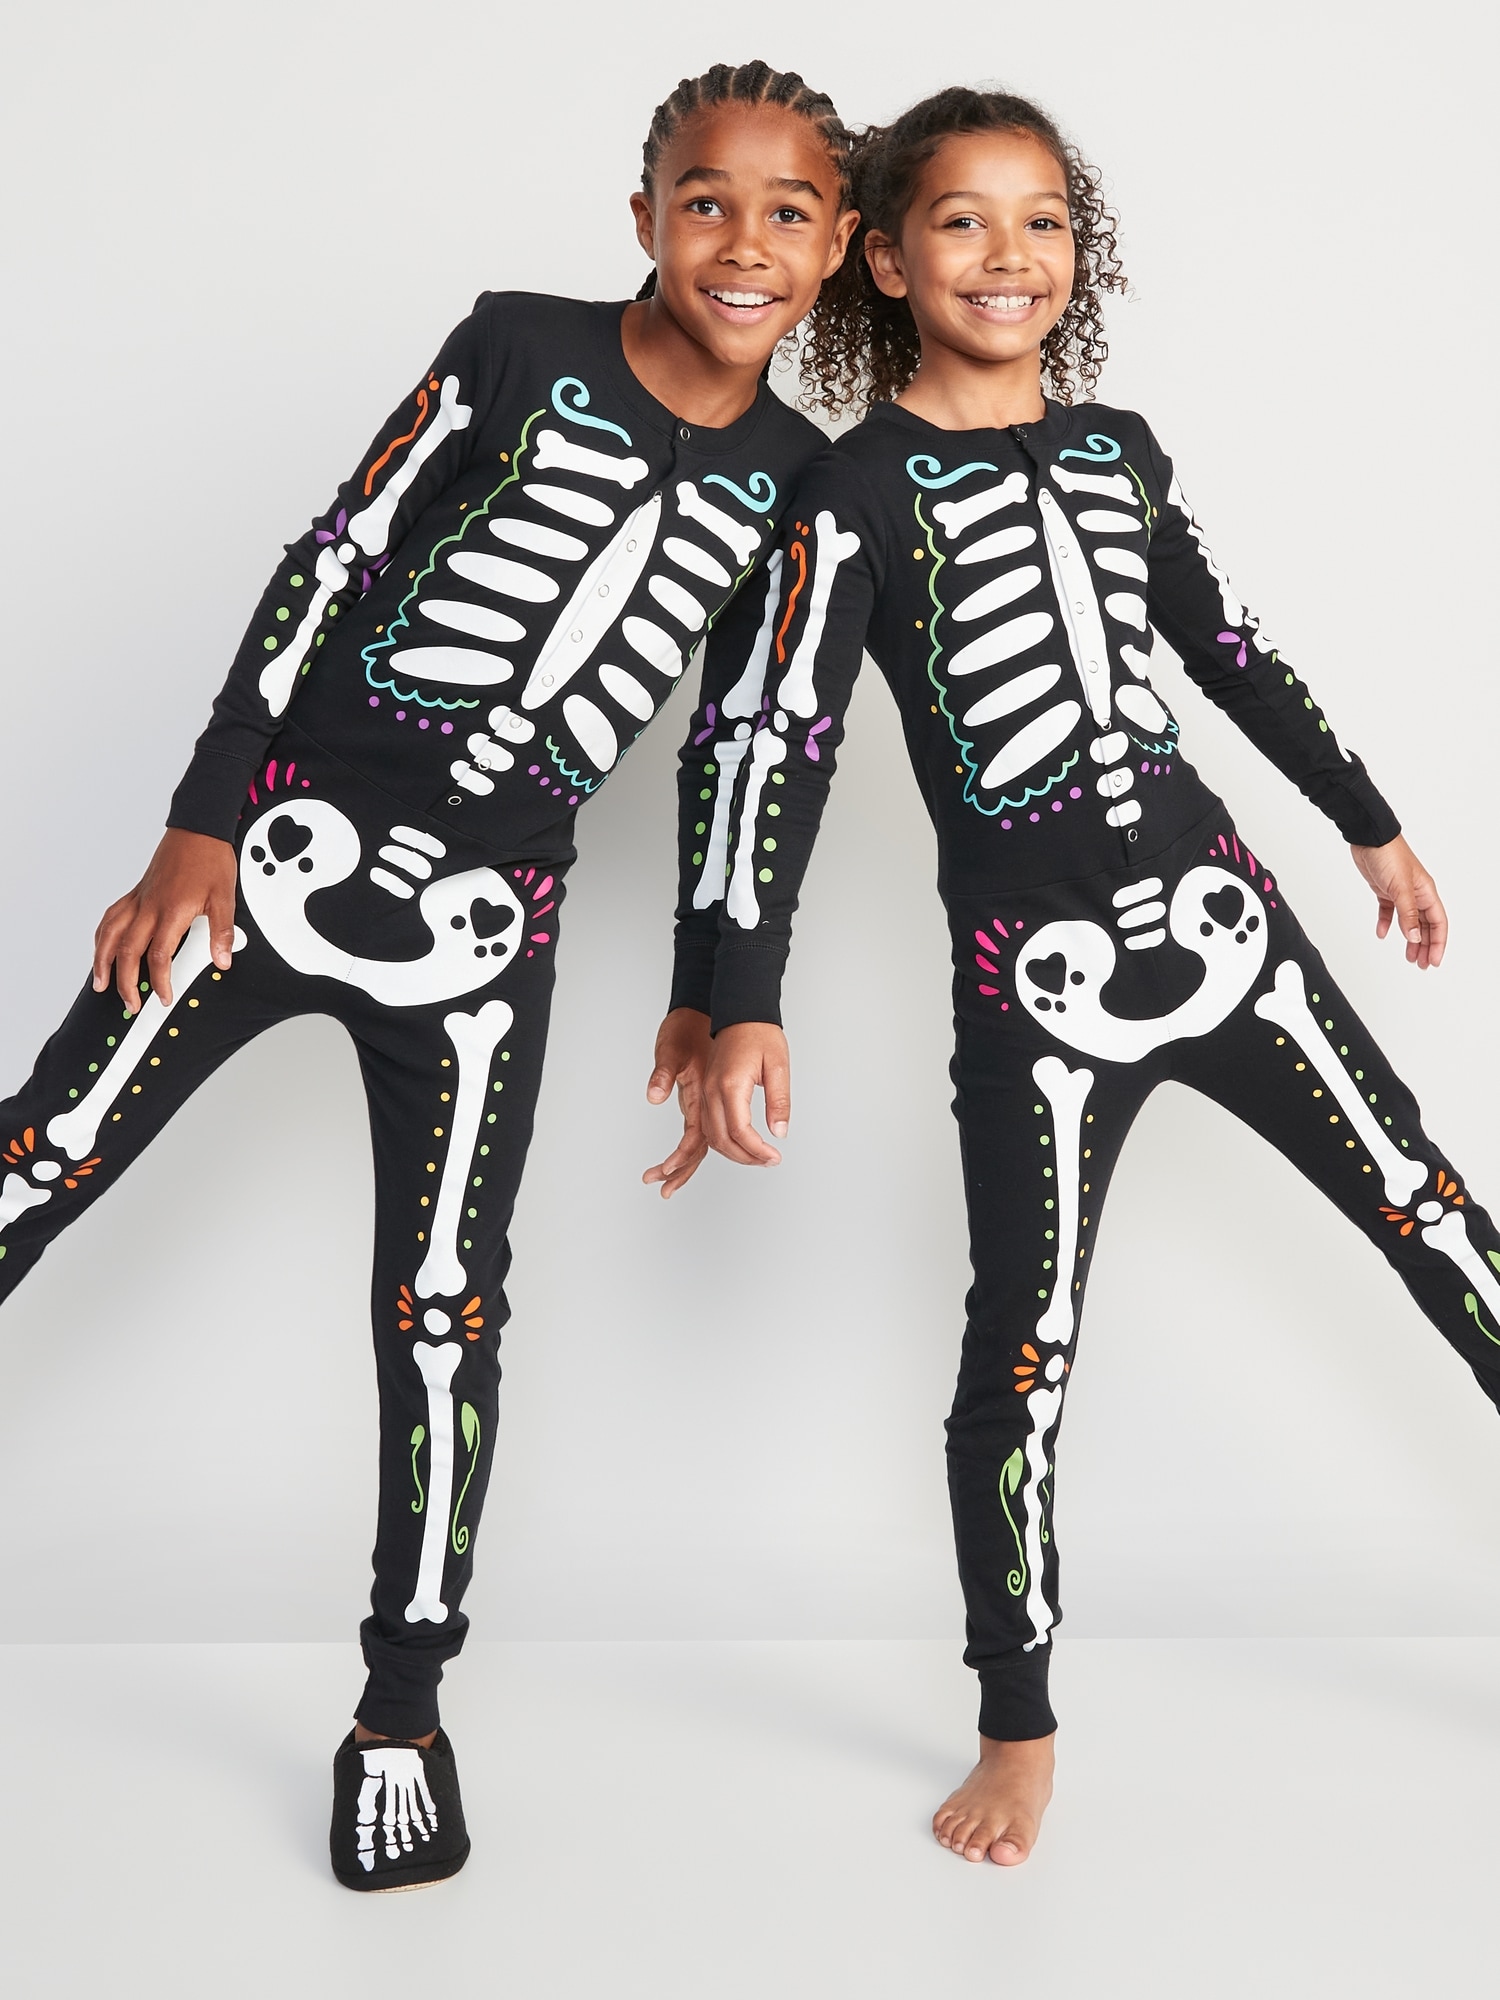 Gender-Neutral Matching Snug-Fit Halloween One-Piece Pajamas for Kids ...